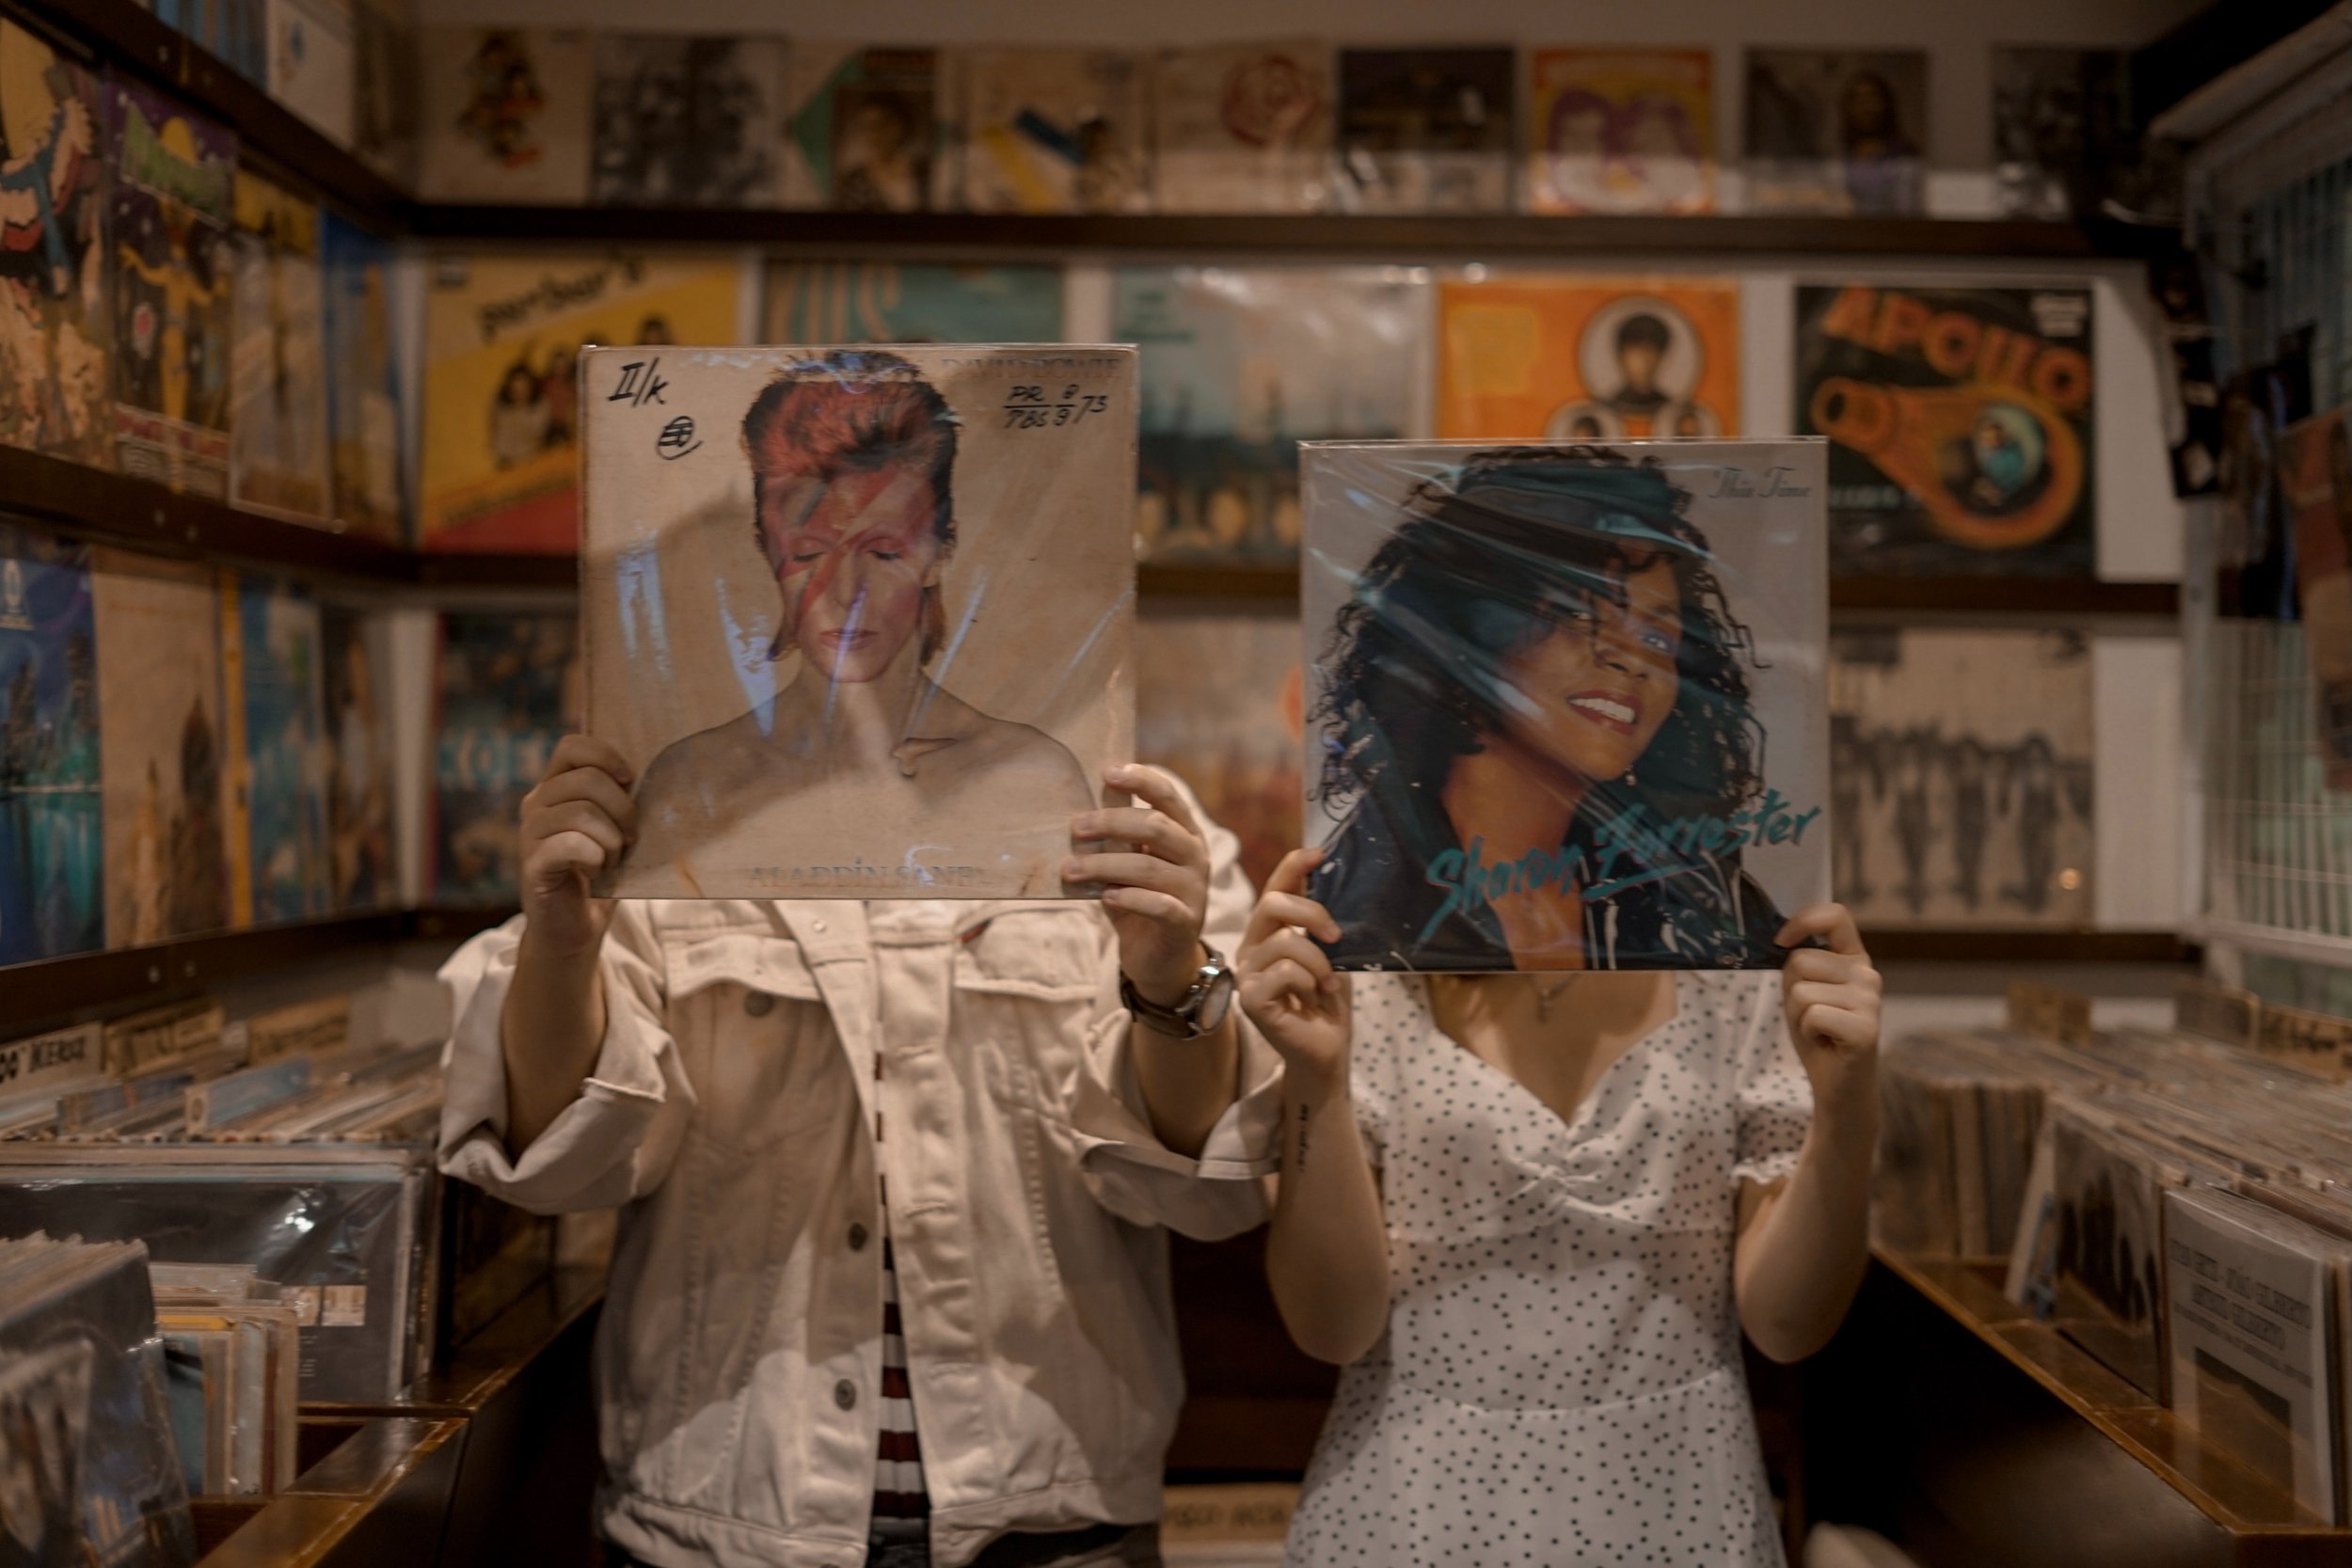 Two people stand in a record store holding up record albums that cover their face.